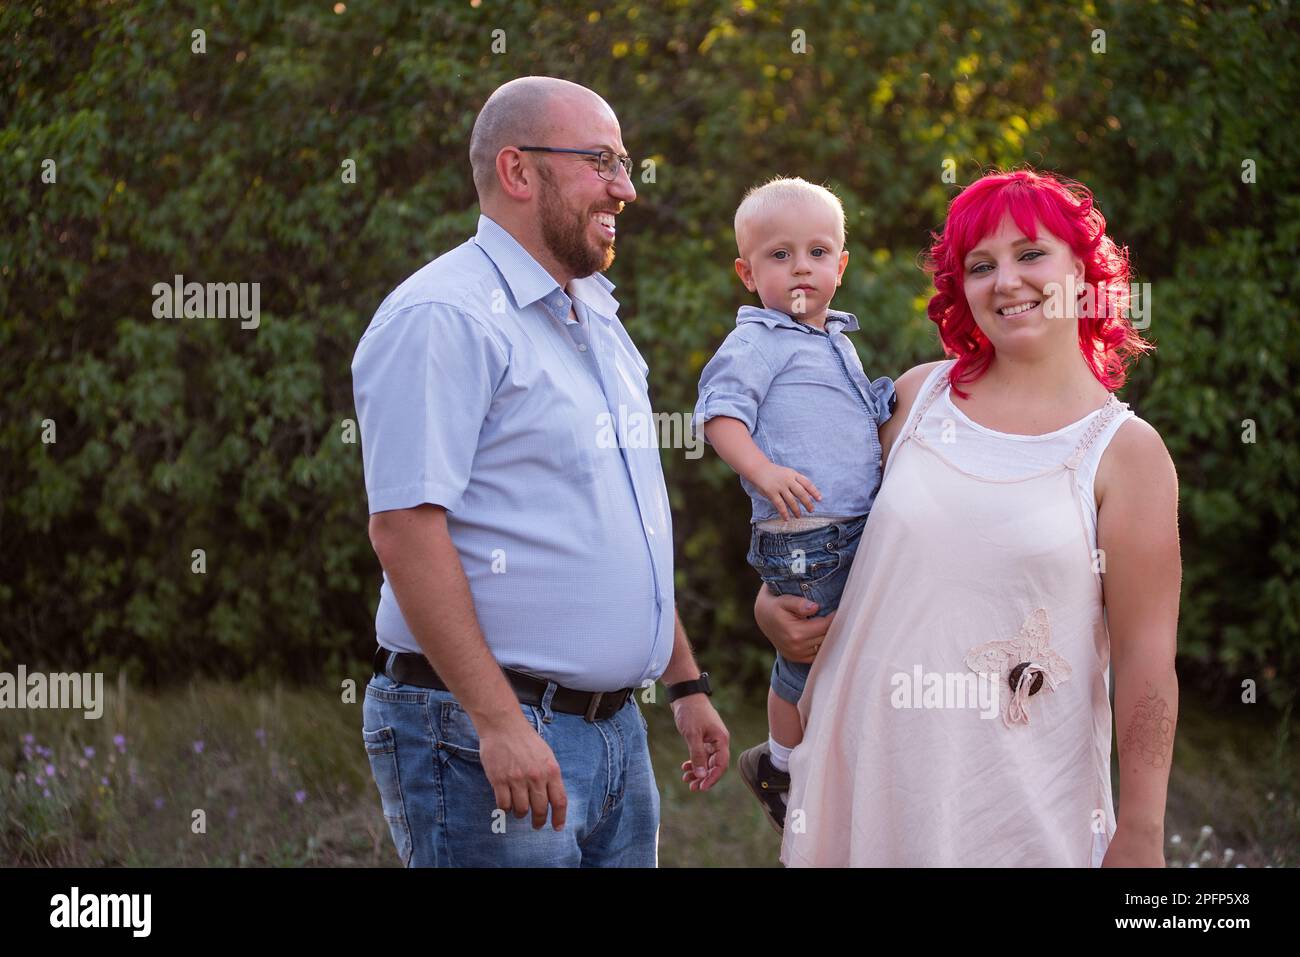 Bald father in glasses looks lovingly at wife with pink hair and son in blue shirt. Close-up portrait diversity family. Children Protection Day. Care Stock Photo